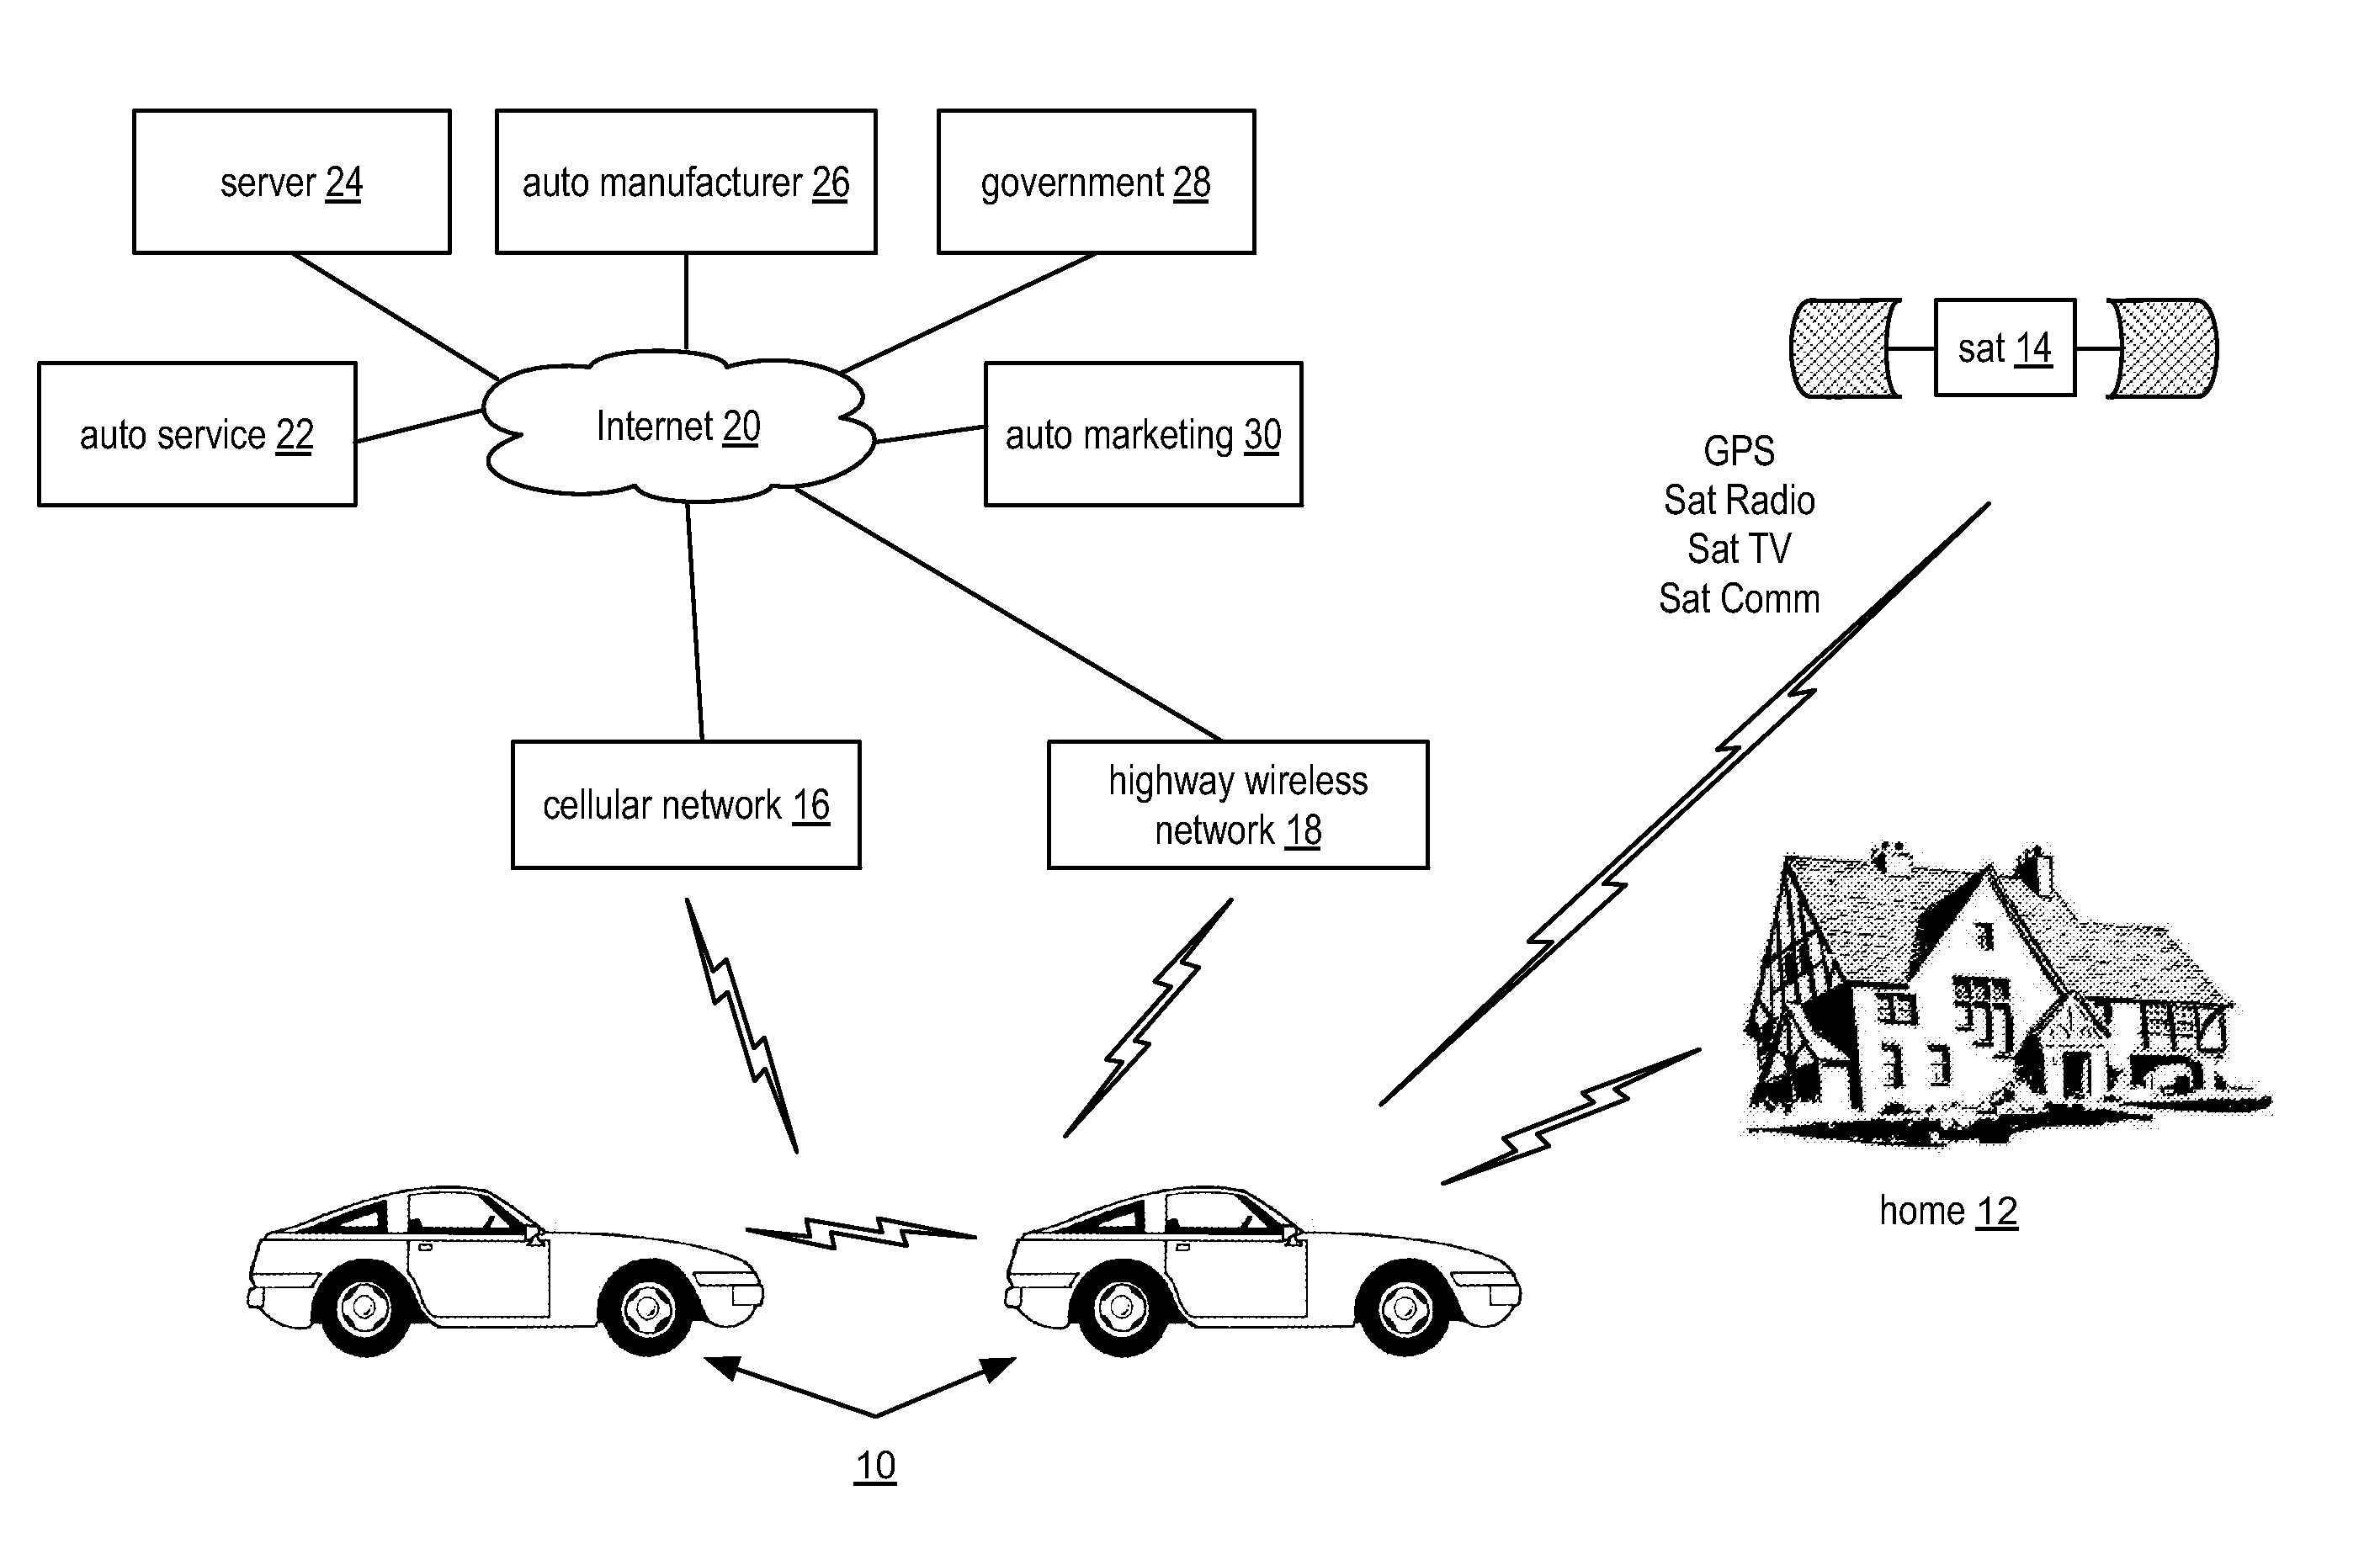 Power management within a vehicular communication network